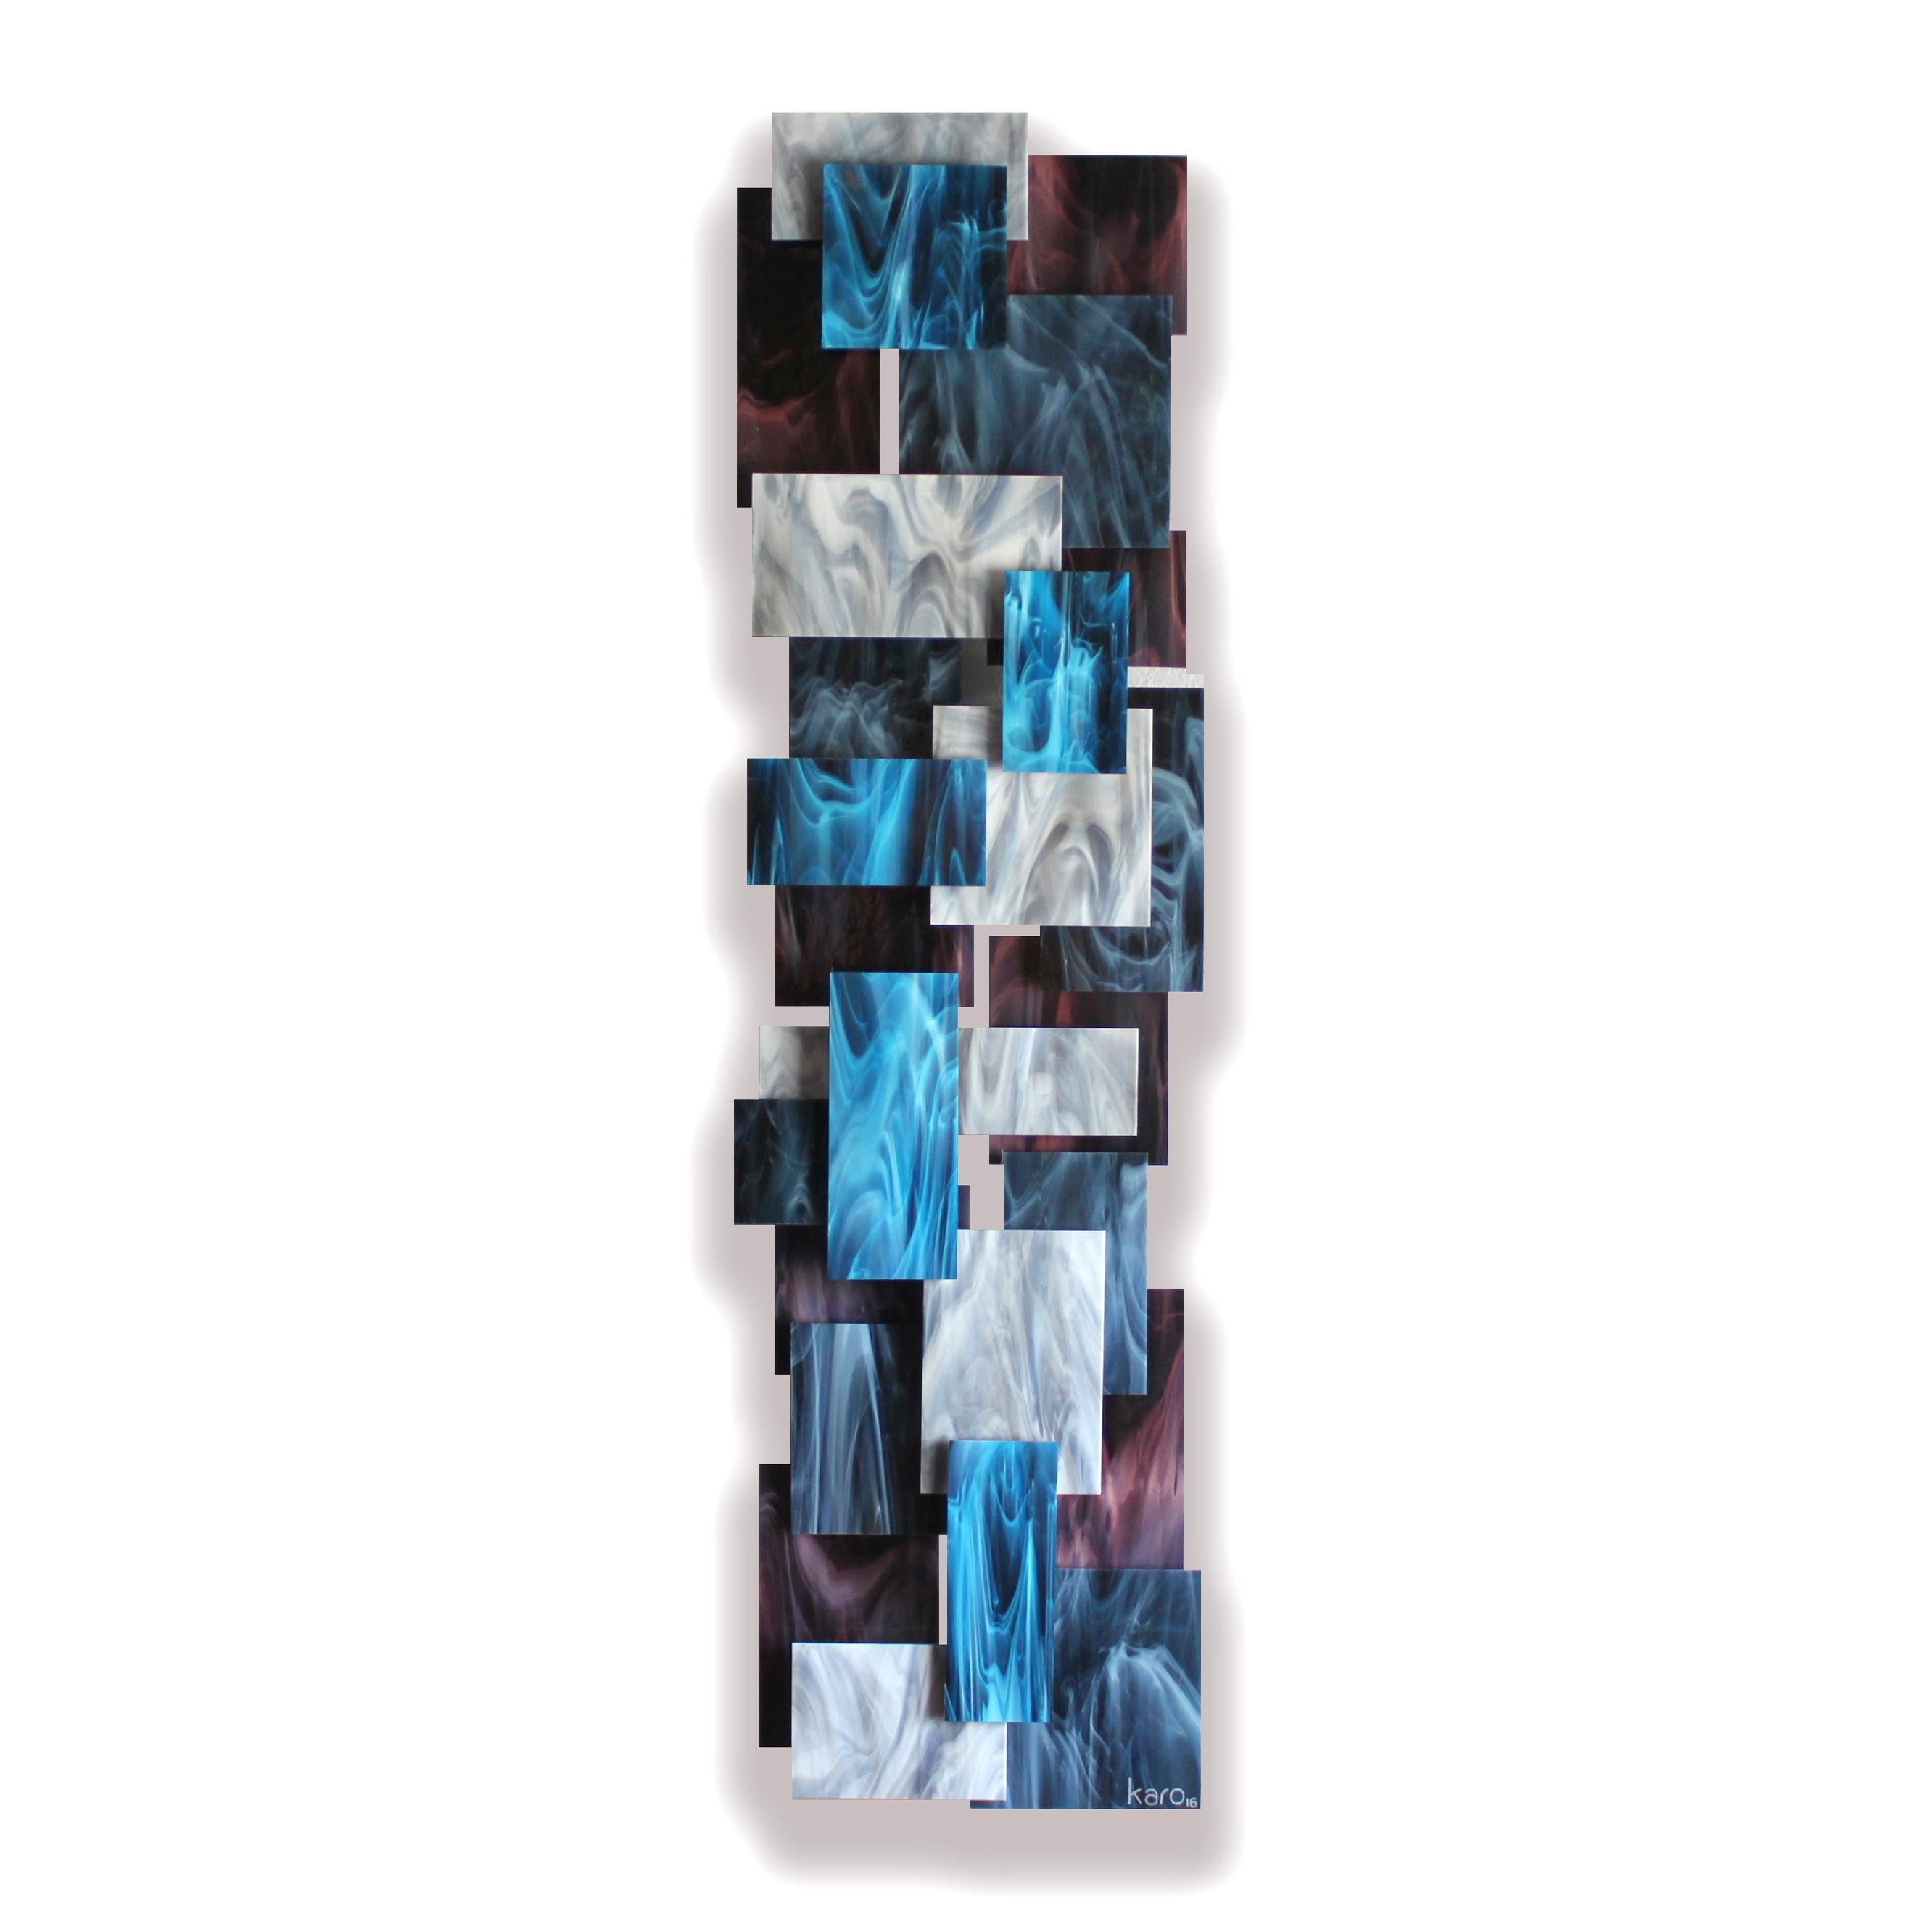 Electric, Abstract 3D Original Glass and Metal Wall Sculpture